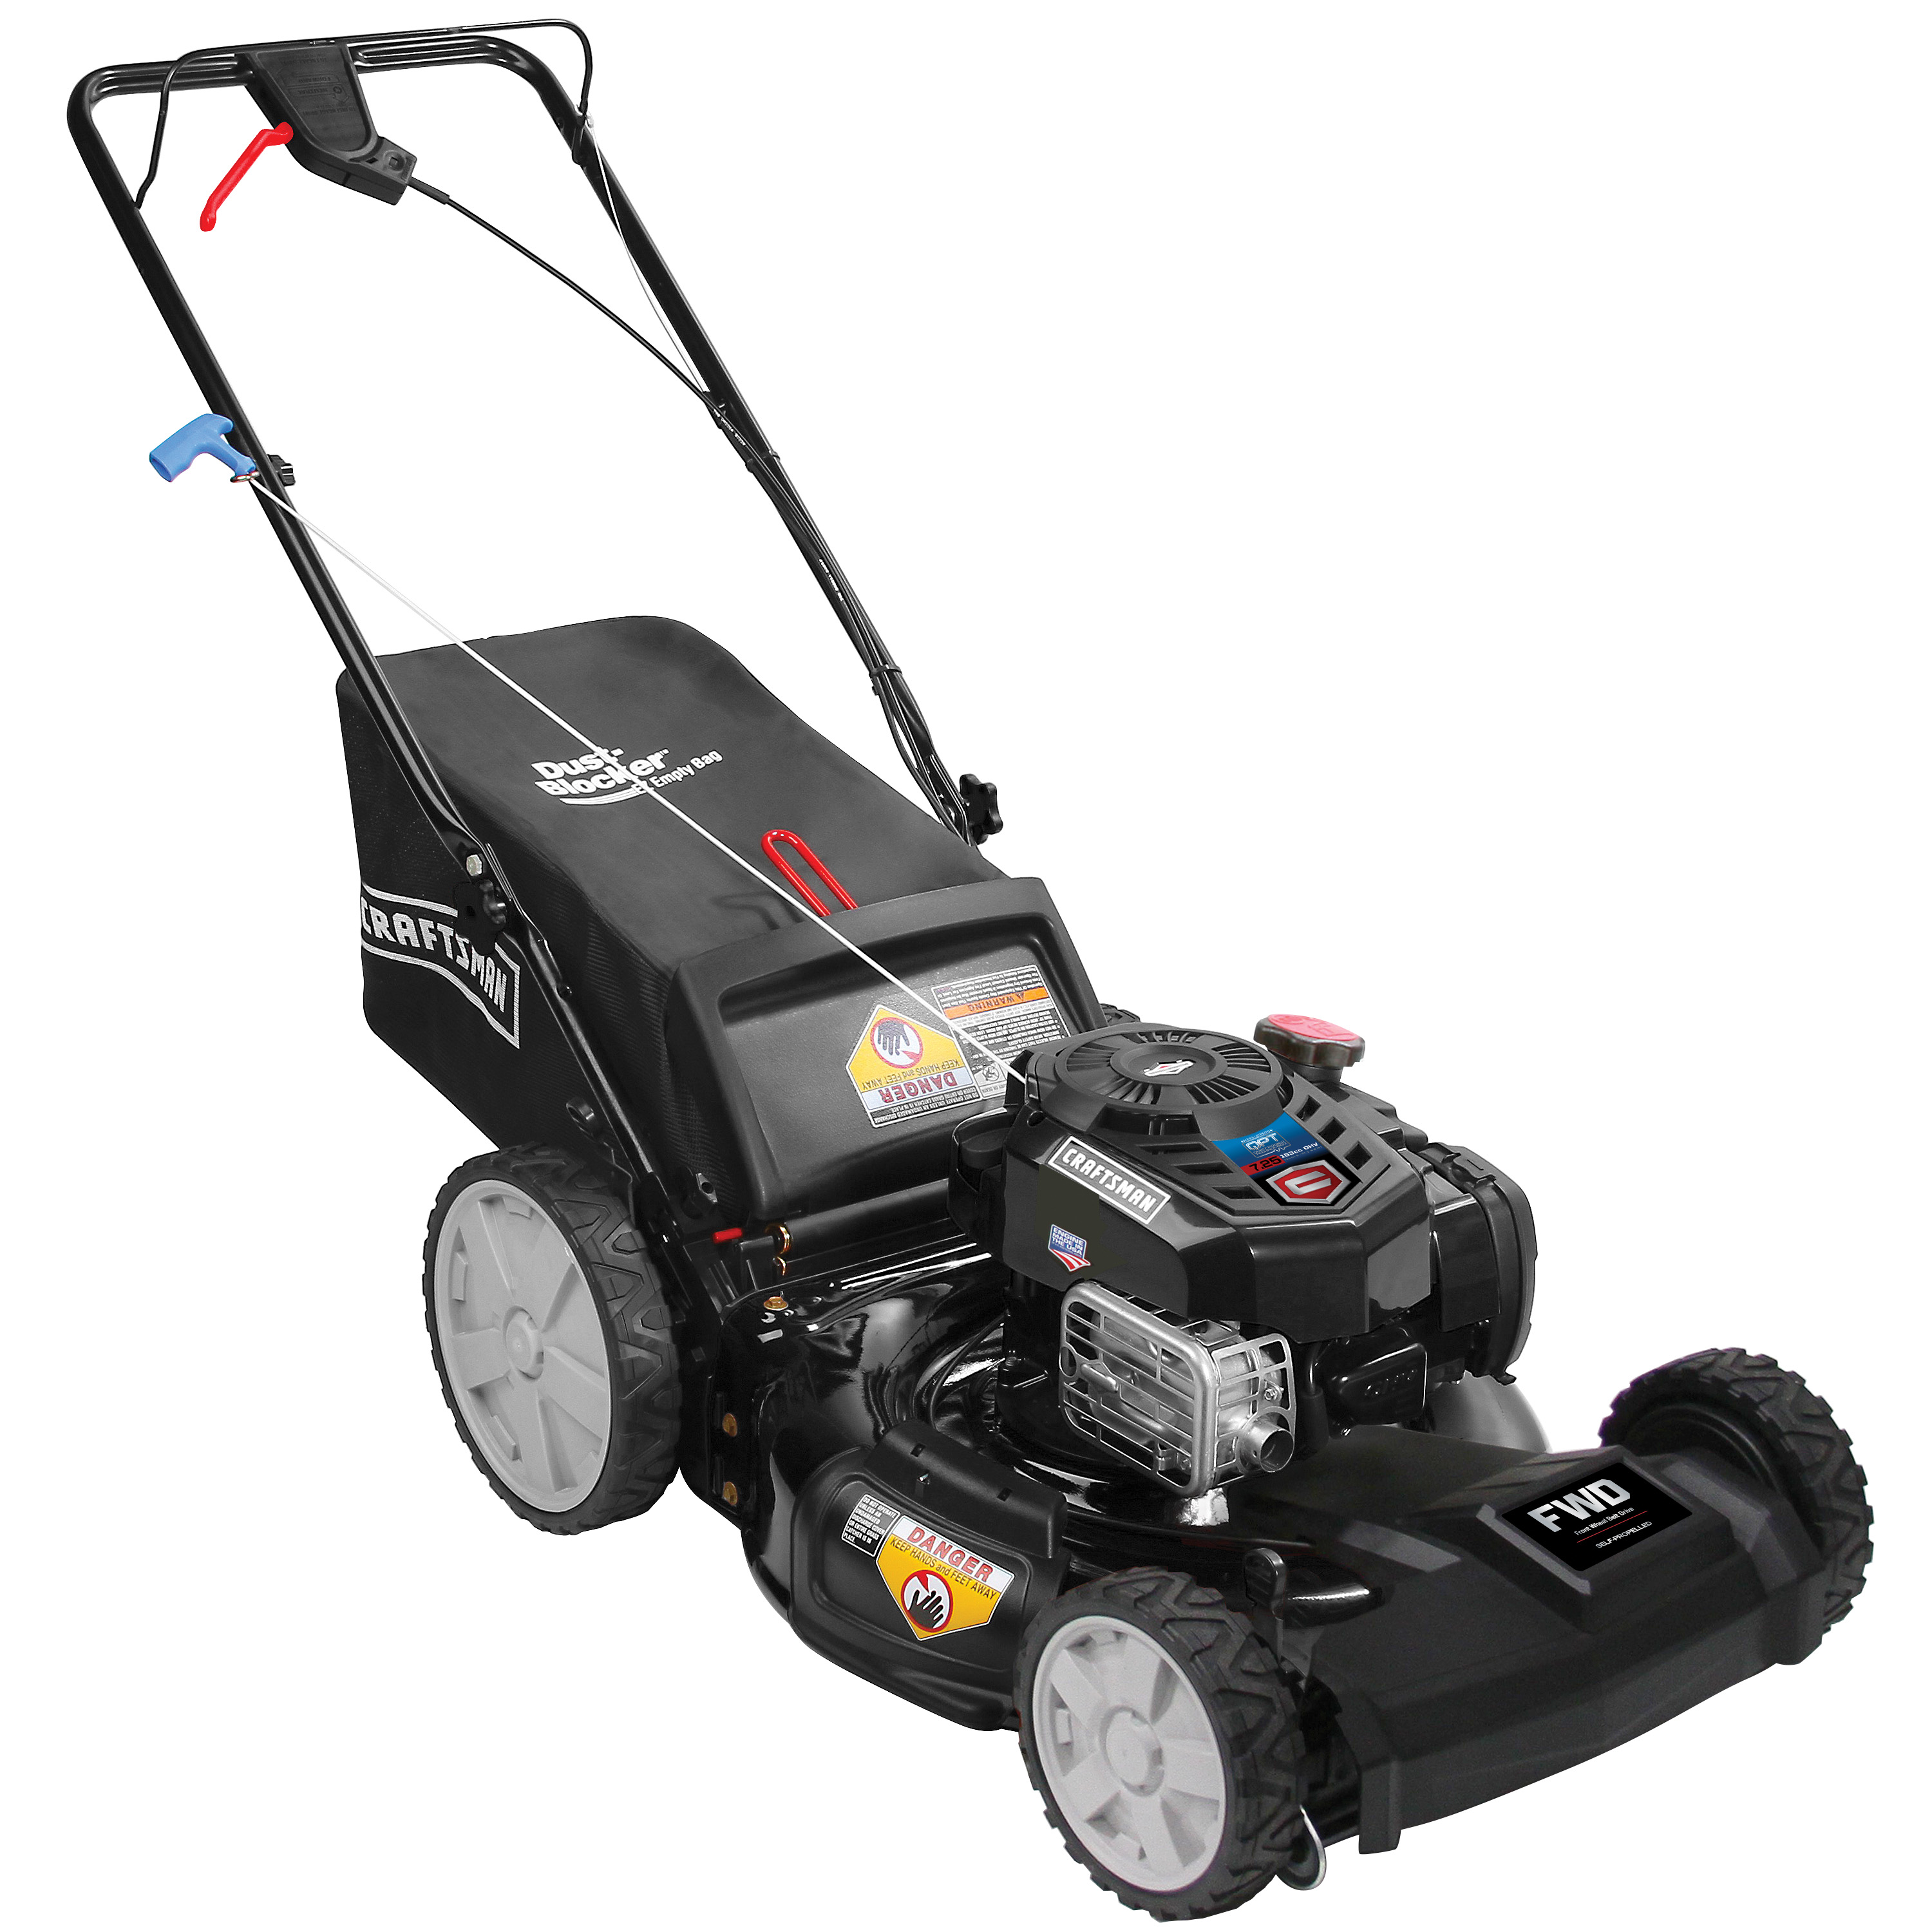 Craftsman 163cc Just Check Add, Quiet Front Wheel Drive Lawn Mower w/ High Rear